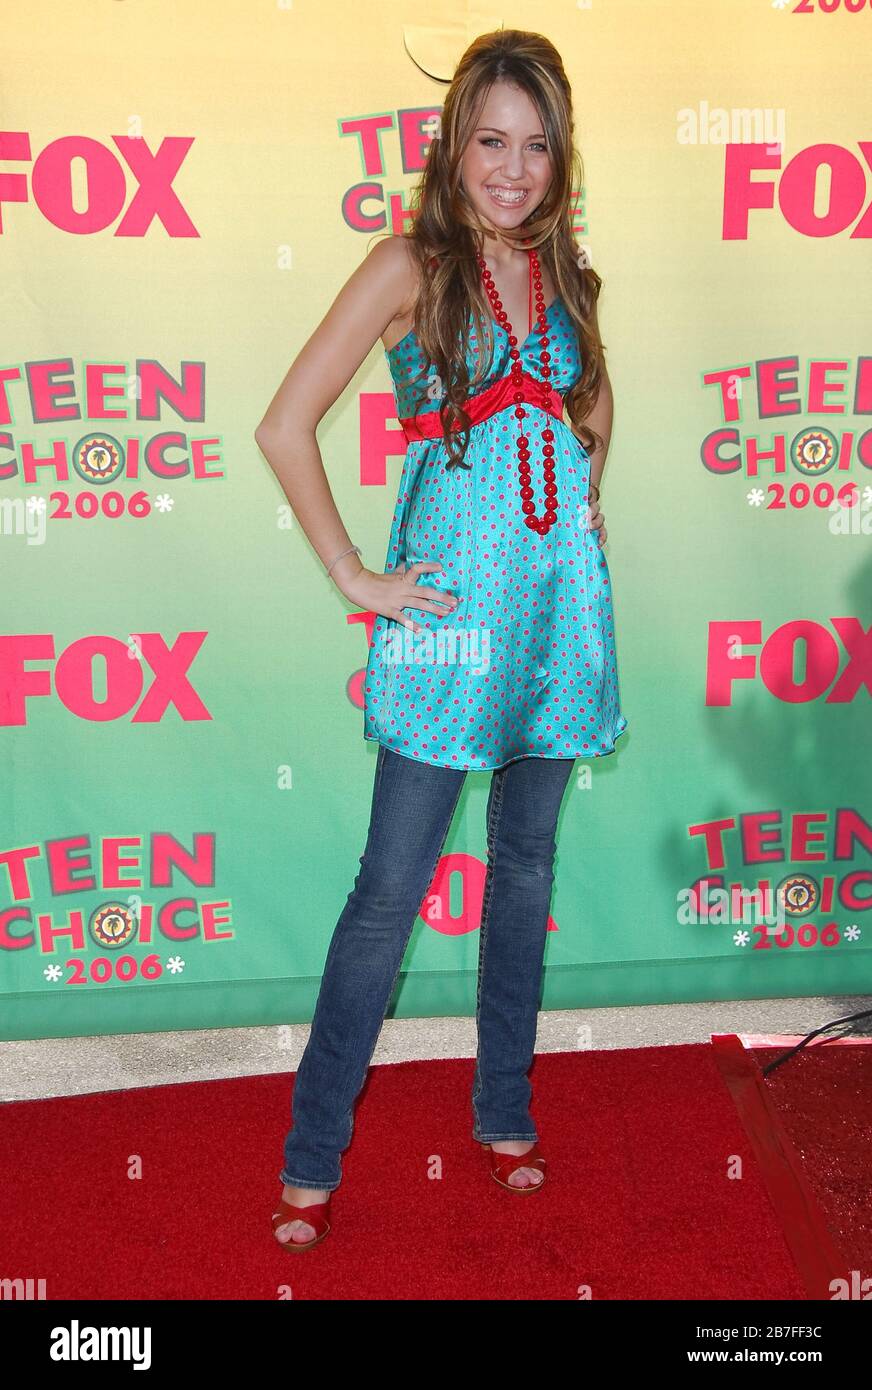 Miley Cyrus at the 2006 Teen Choice Awards - Arrivals at the Gibson Amphitheter in Universal City, CA. The event took place on Sunday, August 20, 2006.  Photo by: SBM / PictureLux Stock Photo